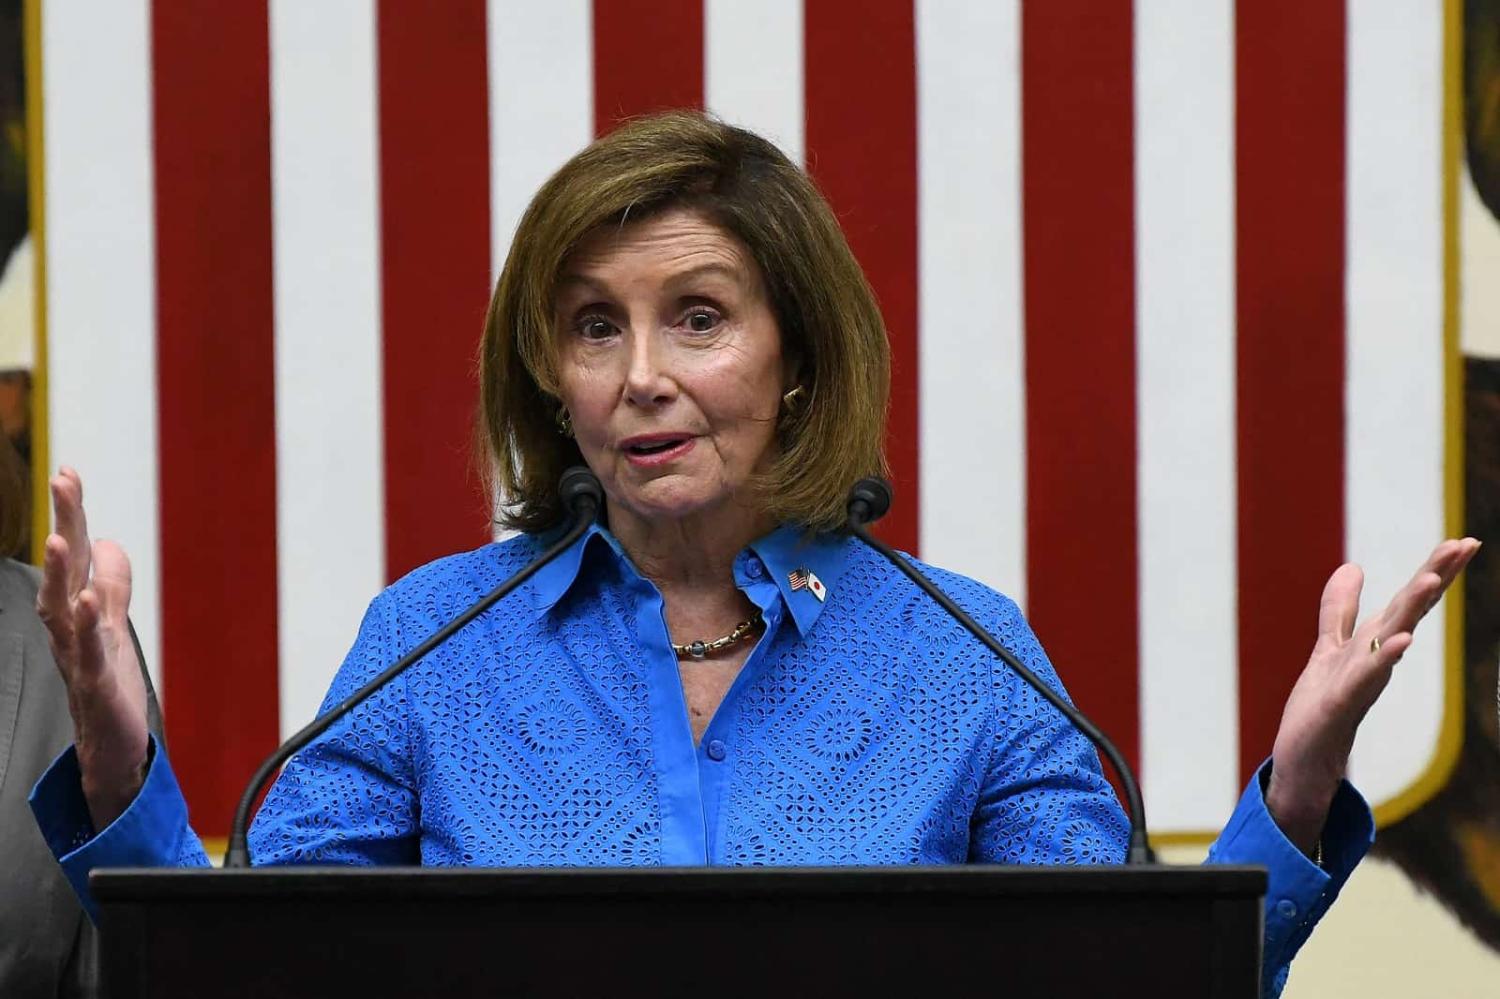 US House Speaker Nancy Pelosi at the US Embassy in Tokyo on 5 August 2022 at the end of her Asian tour, which included a visit to Taiwan (Richard A. Brooks/AFP via Getty Images)